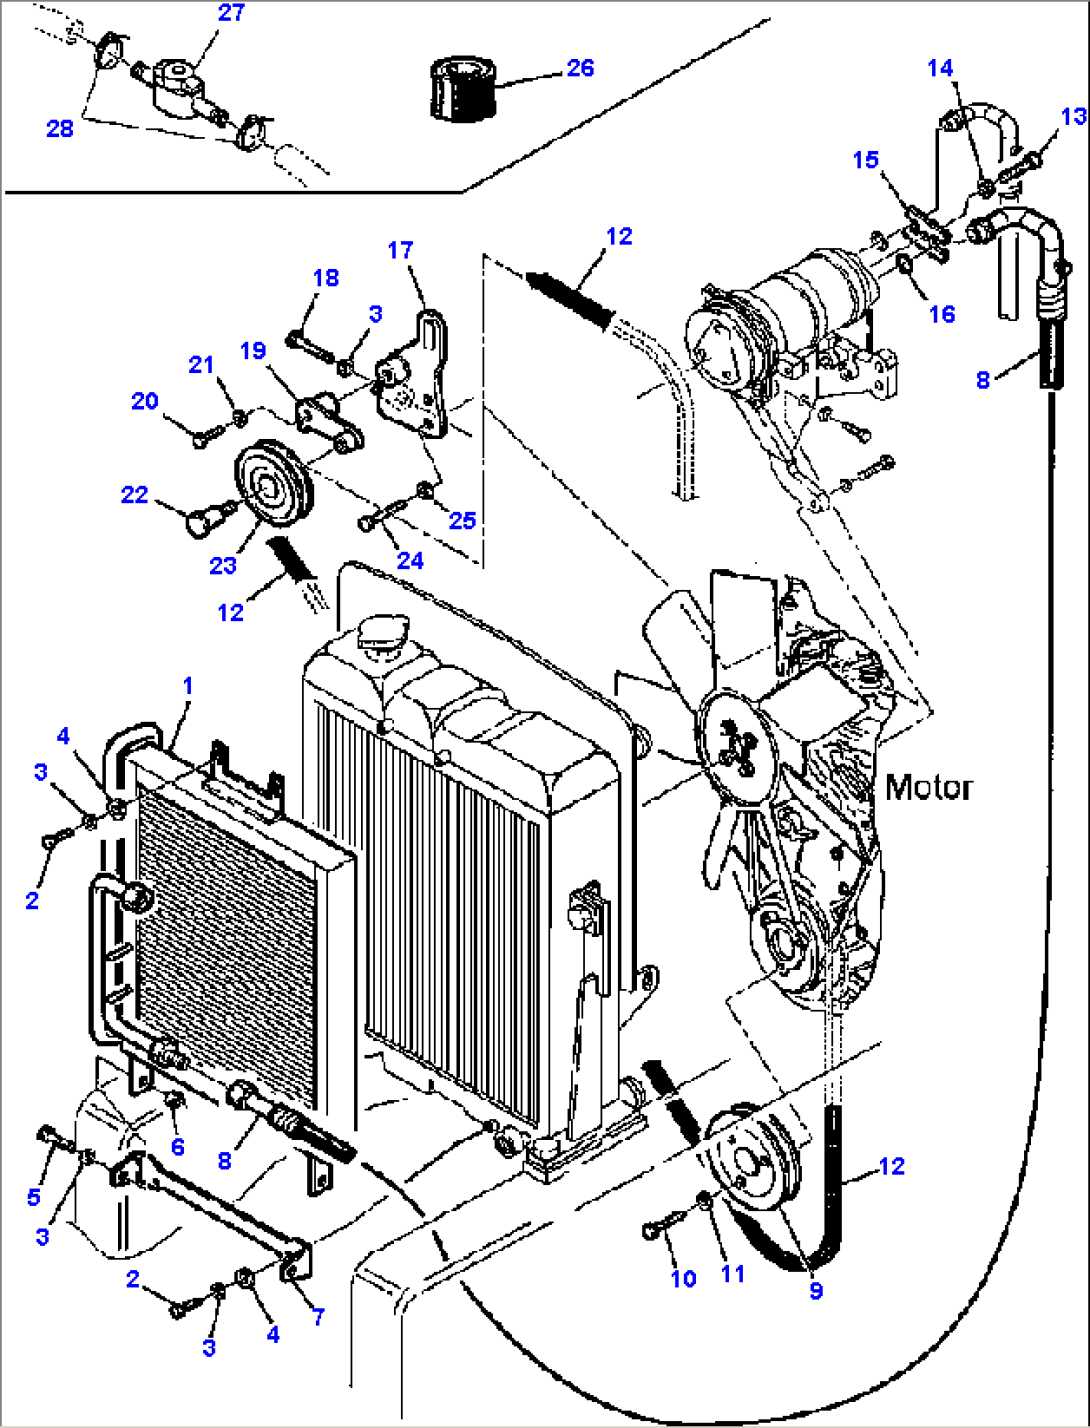 FIG. K5930-01A0 AIR CONDITIONER - CONDENSER PIPING